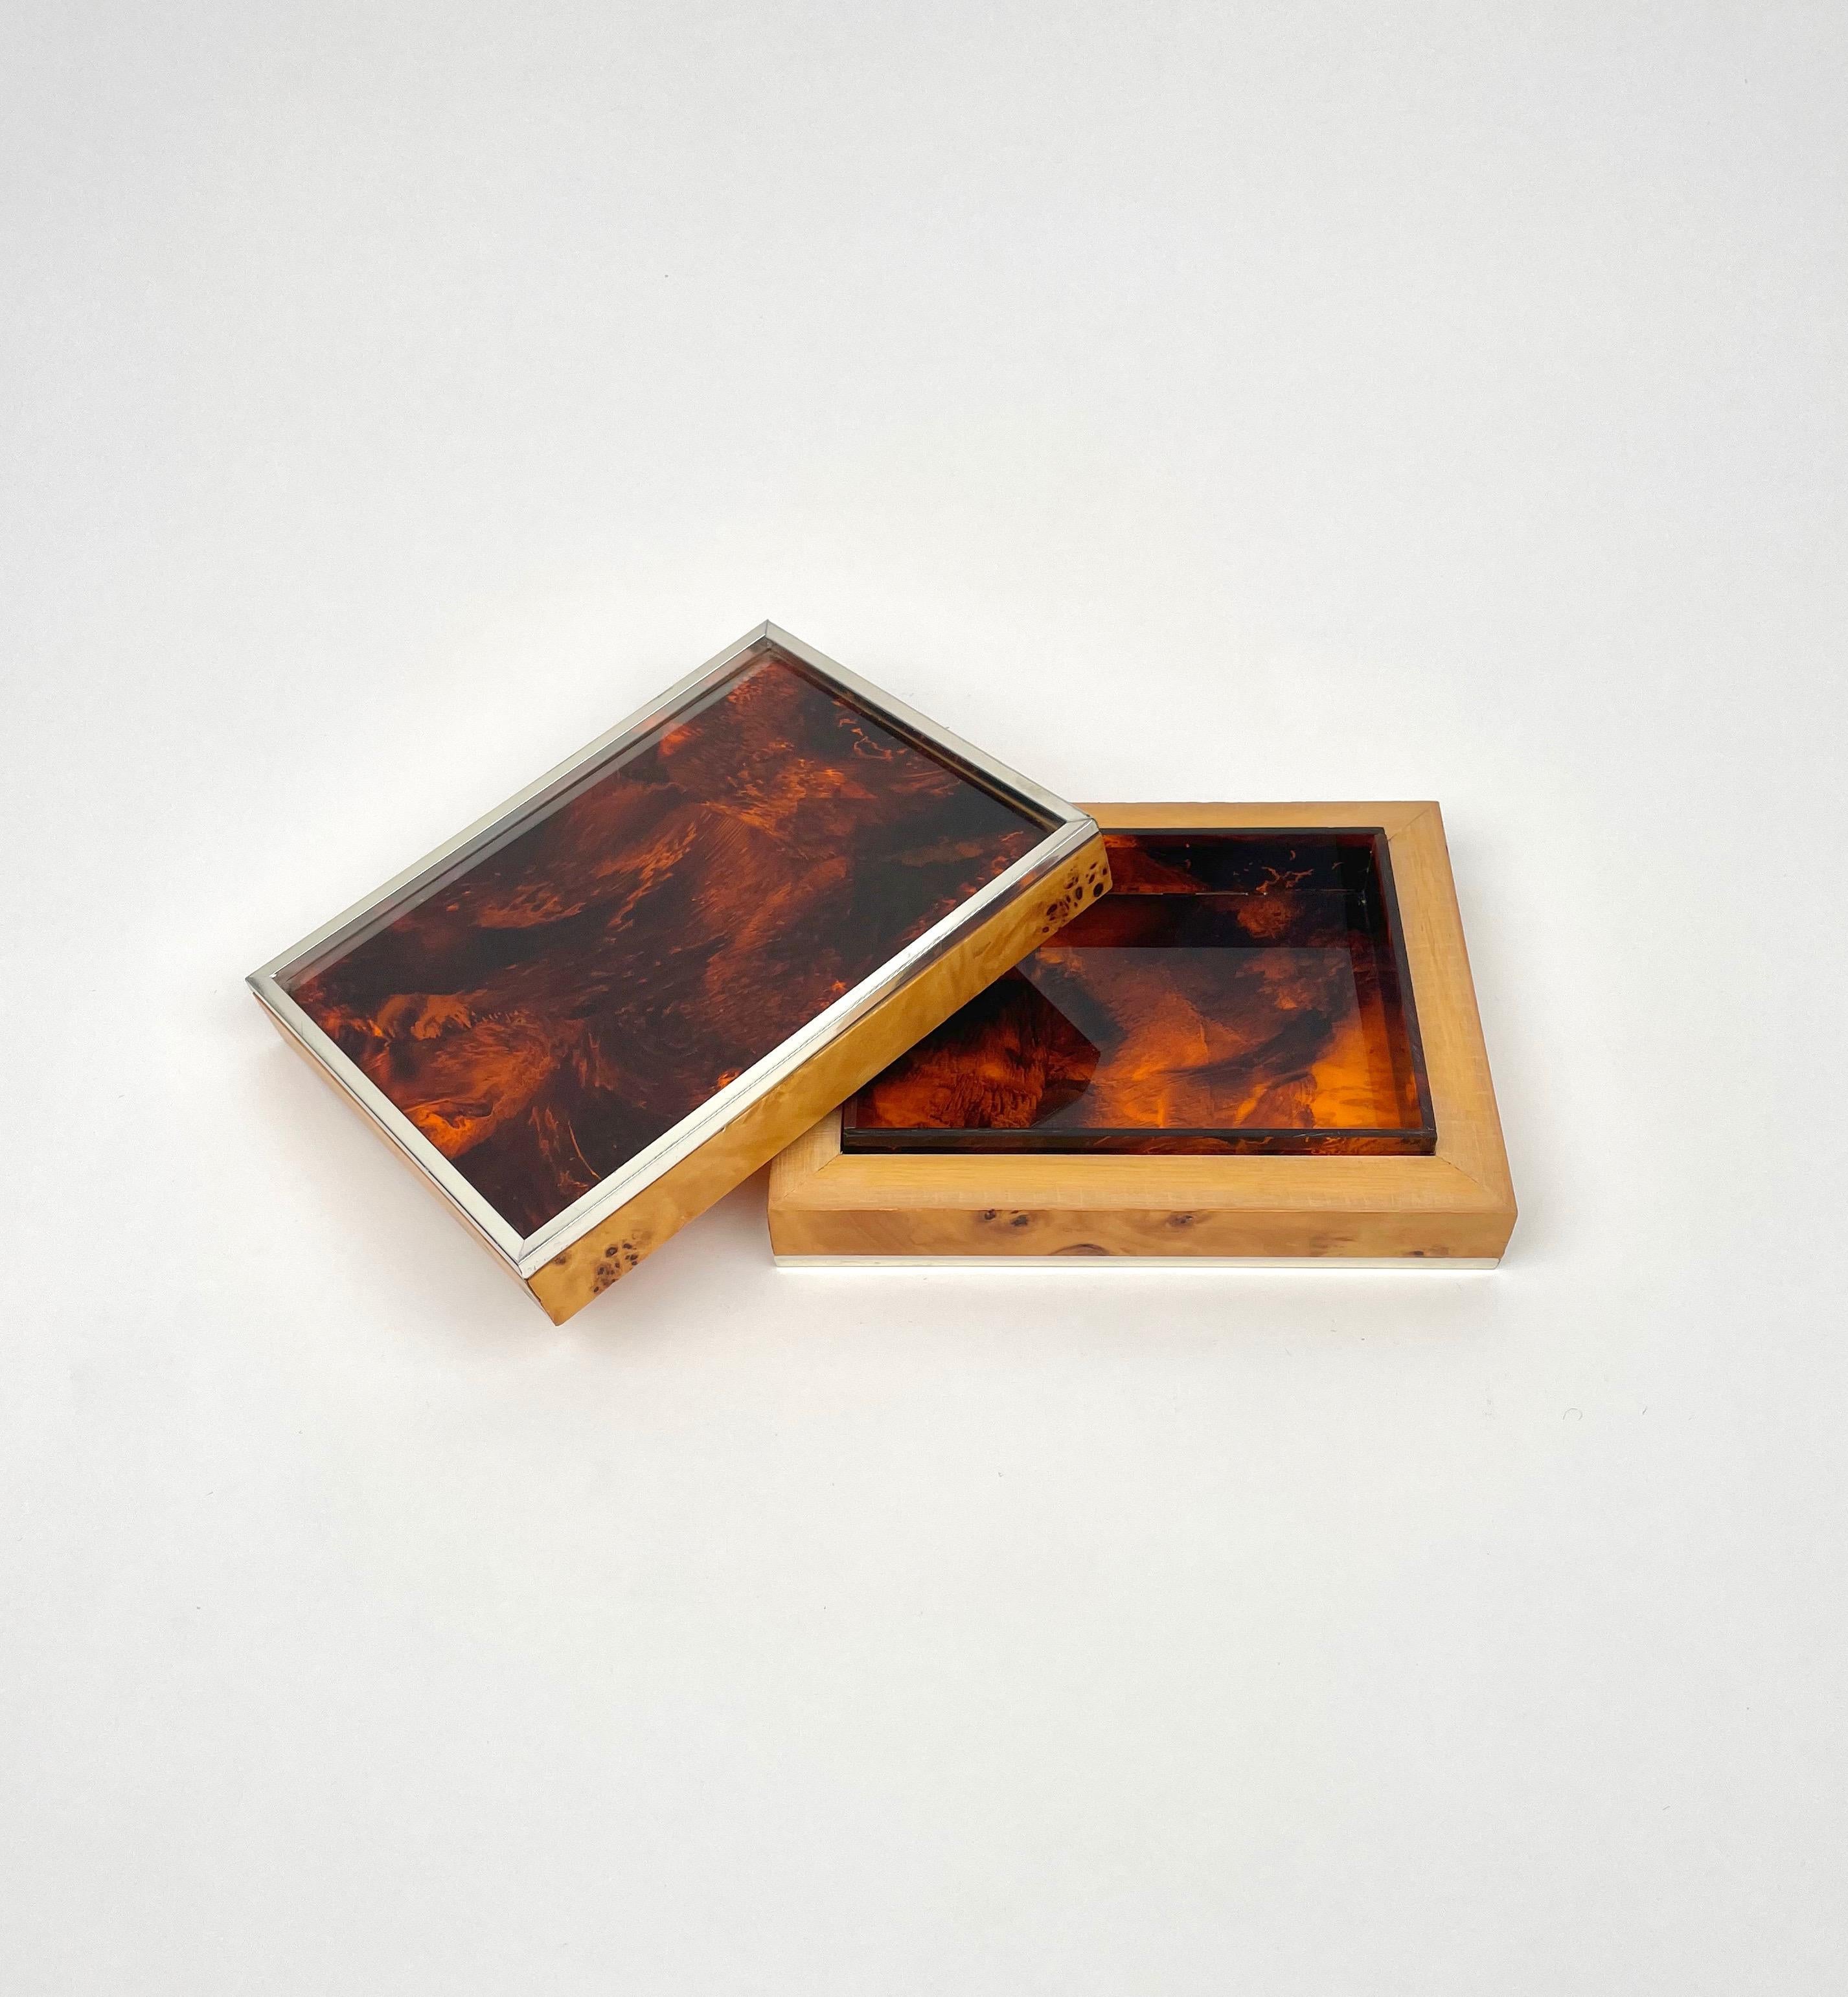 Rectangular box in tortoiseshell-effect lucite and burl wood frame made in Italy in the 1970s.